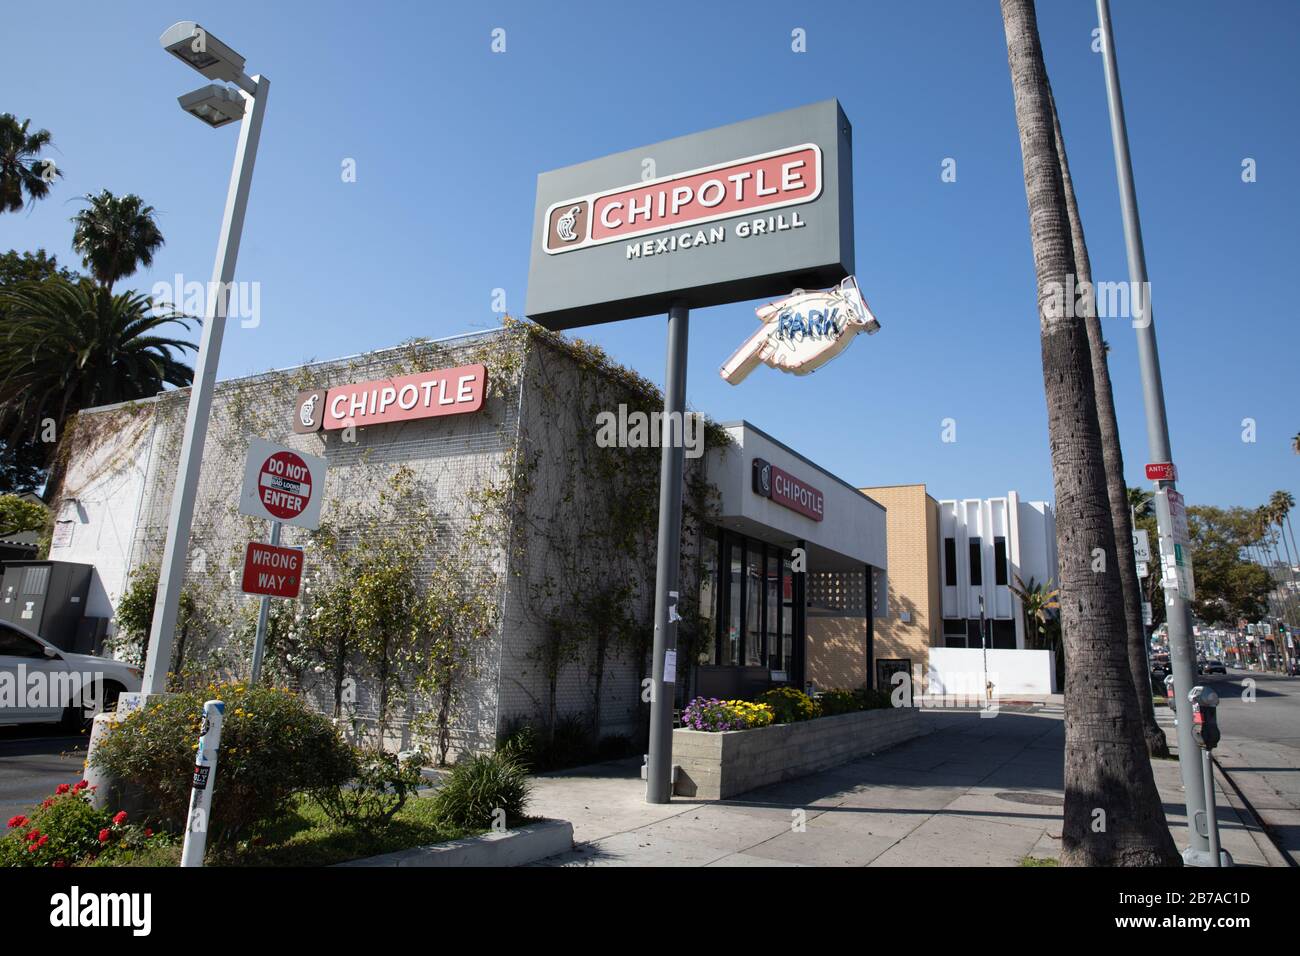 Chipotle restaurant facade in West Hollywood, CA Stock Photo